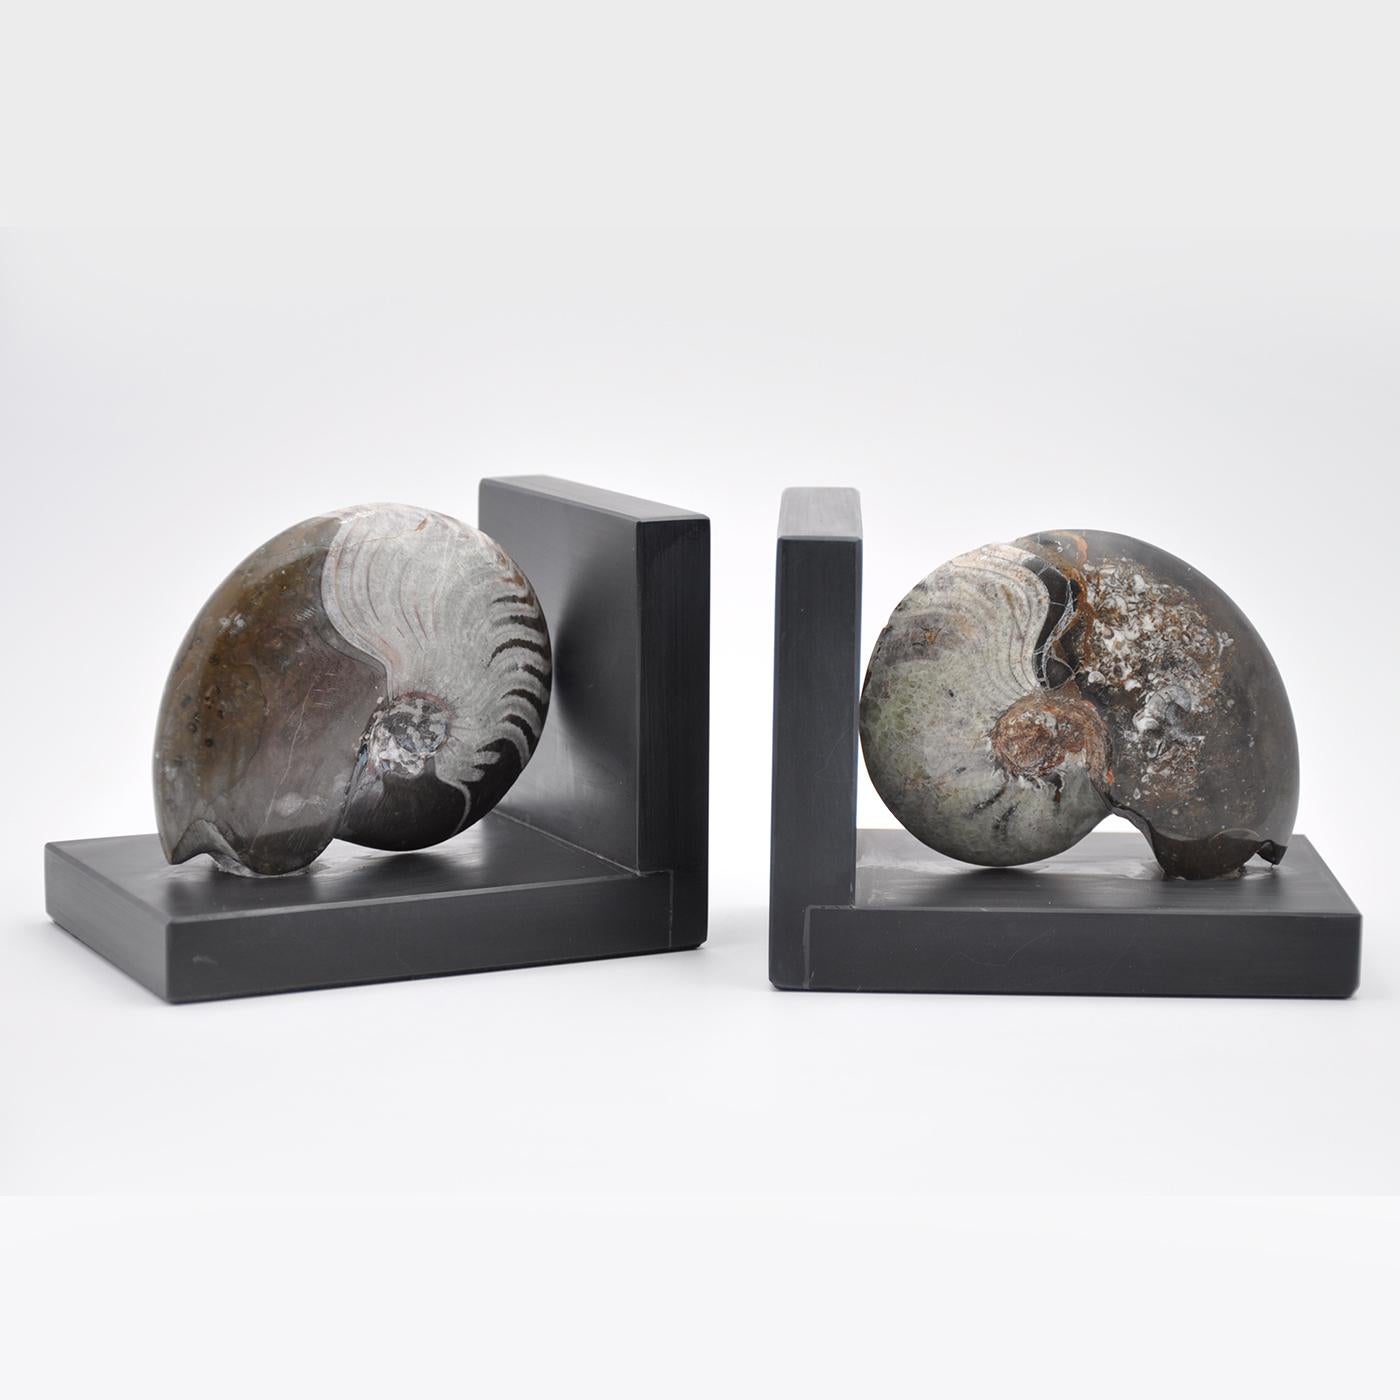 Ammonite Booksends sculpture is able to elegantly combine contemporary design with the authentic fossil shells that date back to millions of years ago. Design Center love the shape and texture of this ammonite fossil on stand because it could be a